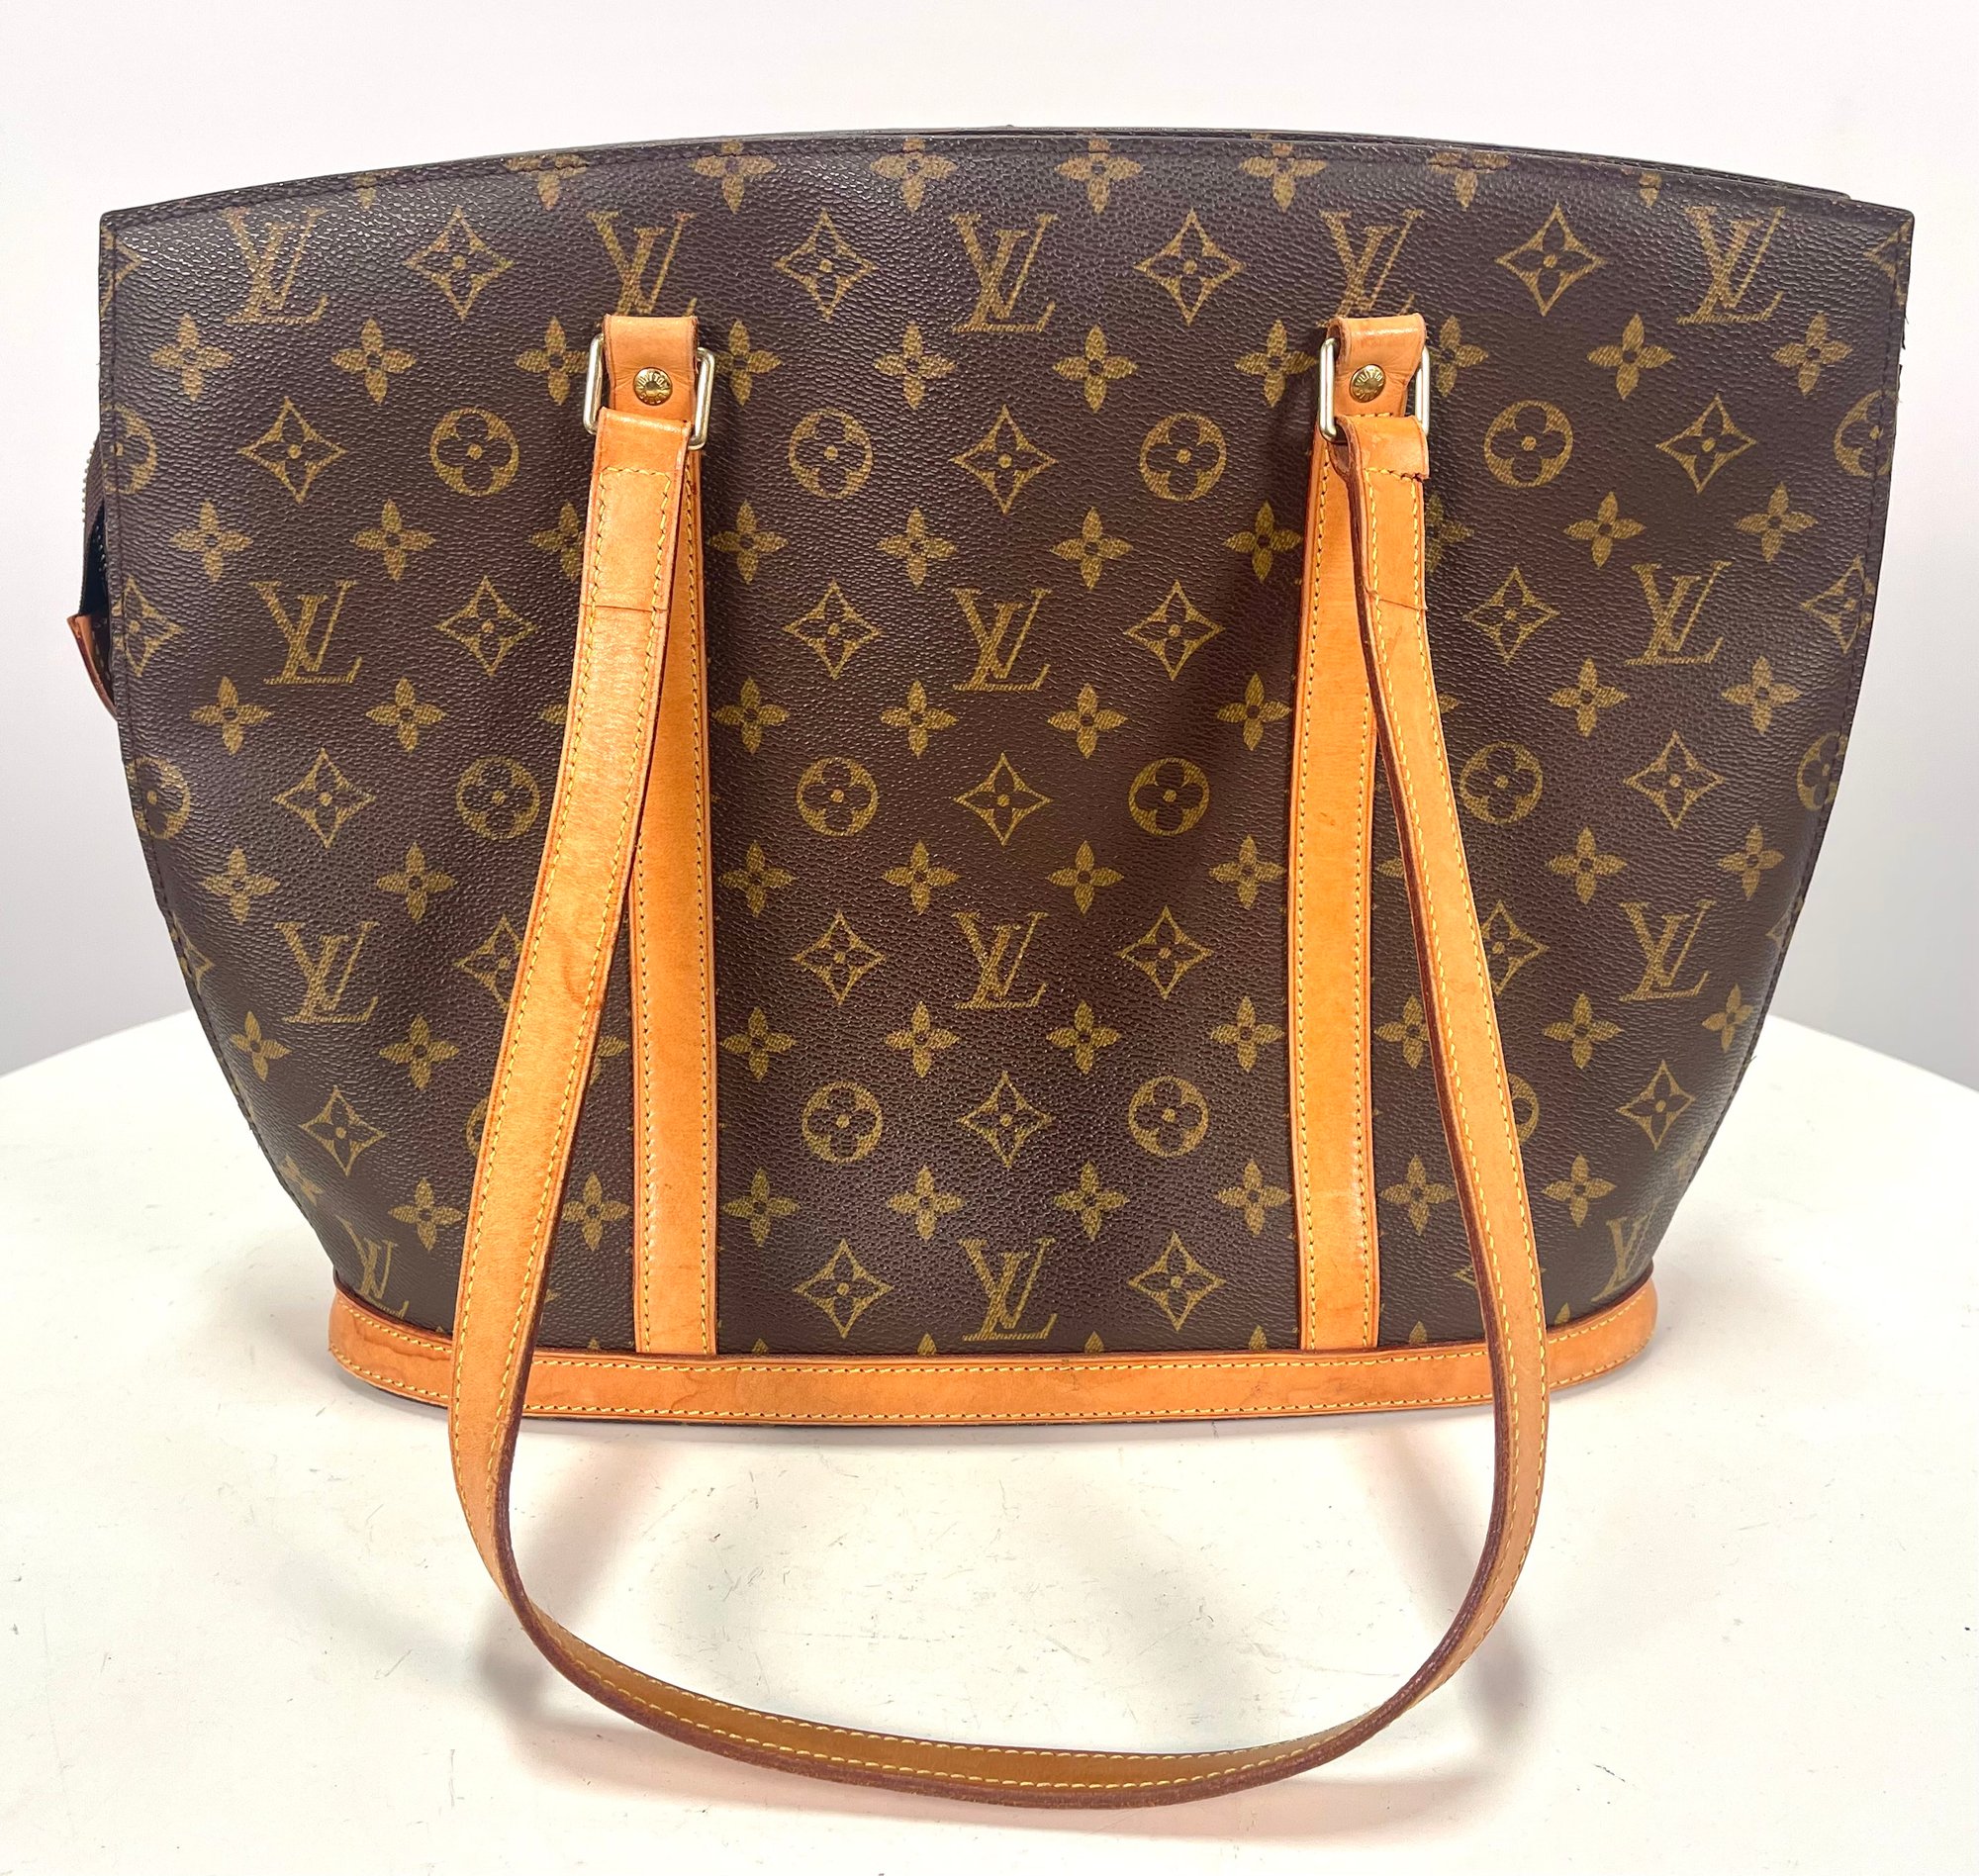 Louis Vuitton Babylone Tote Reviewed